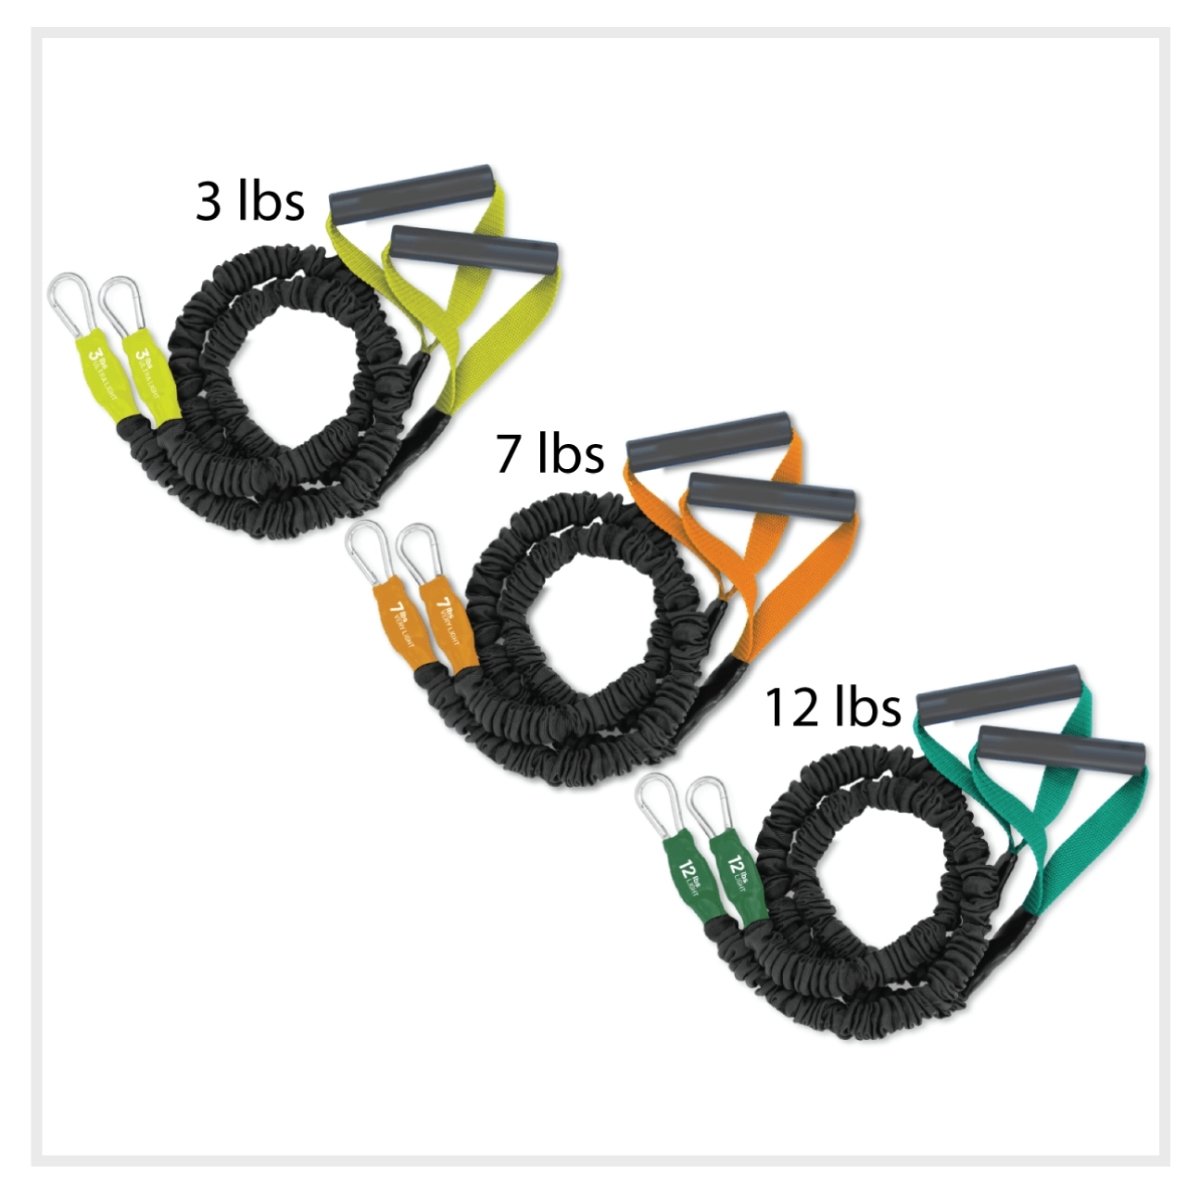 American Made Covered resistance tubes for shoulder rehabilitation at home build arms exercise bands resistance bands compare to Crossover Symmetry. Great for Crossfit